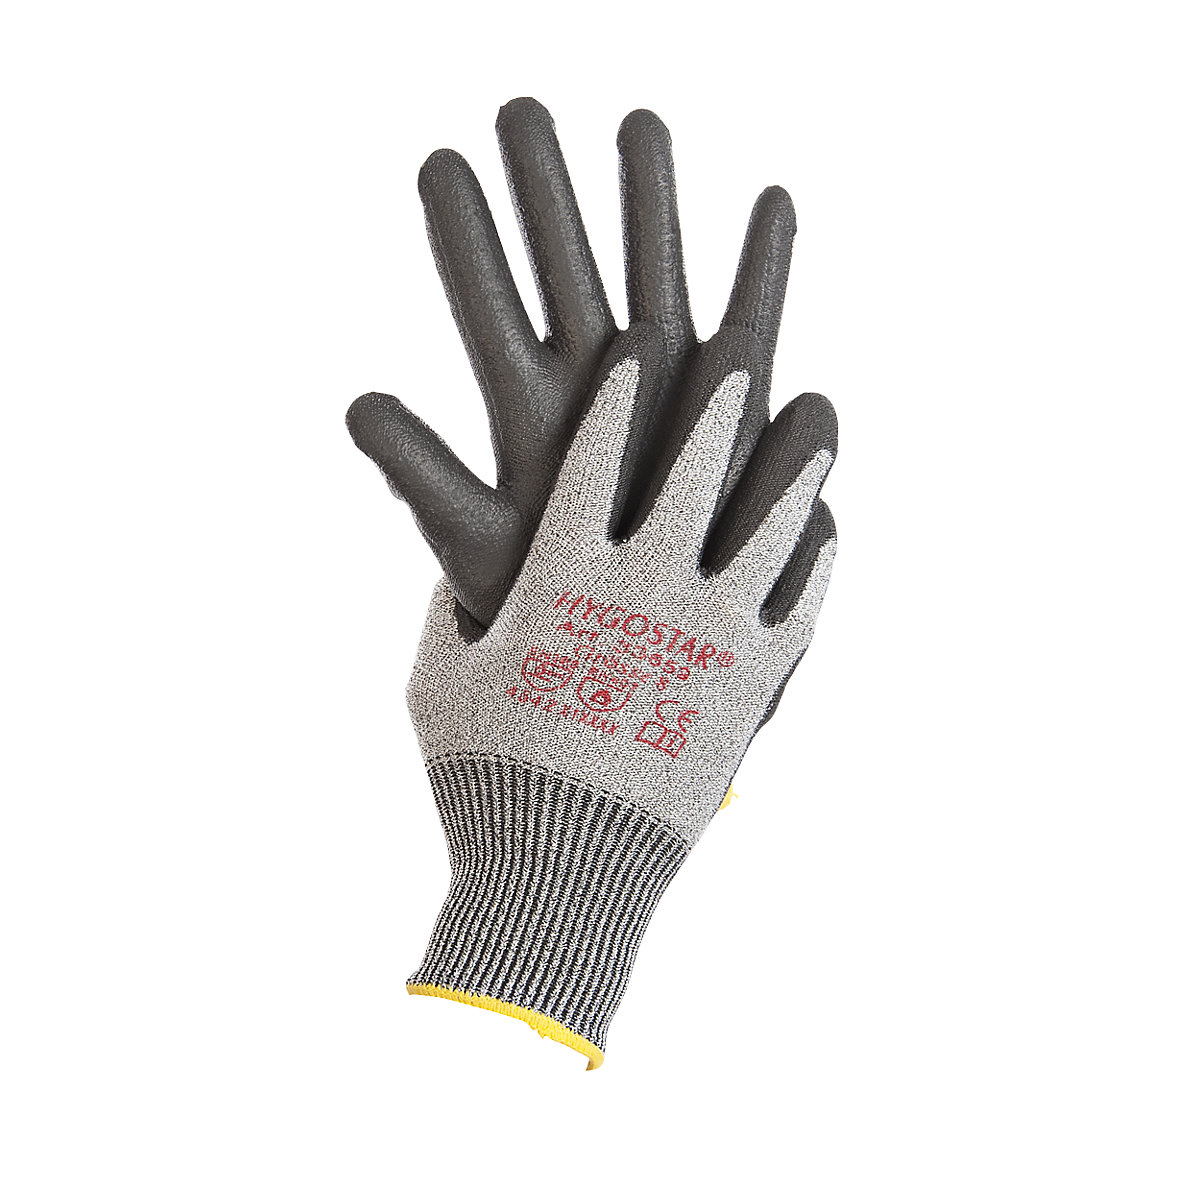 CUT SAFE cut protection gloves